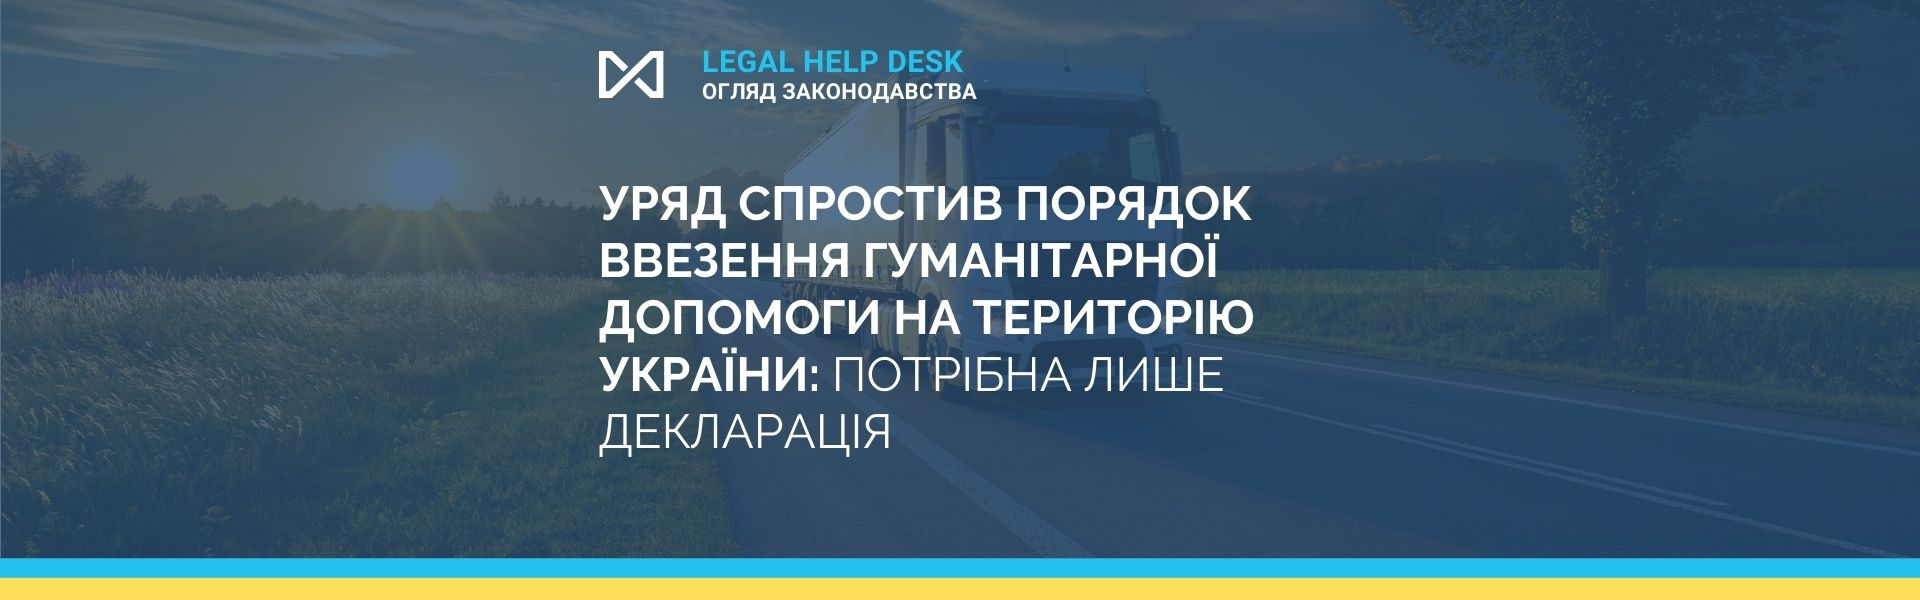 The government has simplified the procedure for importing humanitarian aid into Ukraine: only a declaration is needed